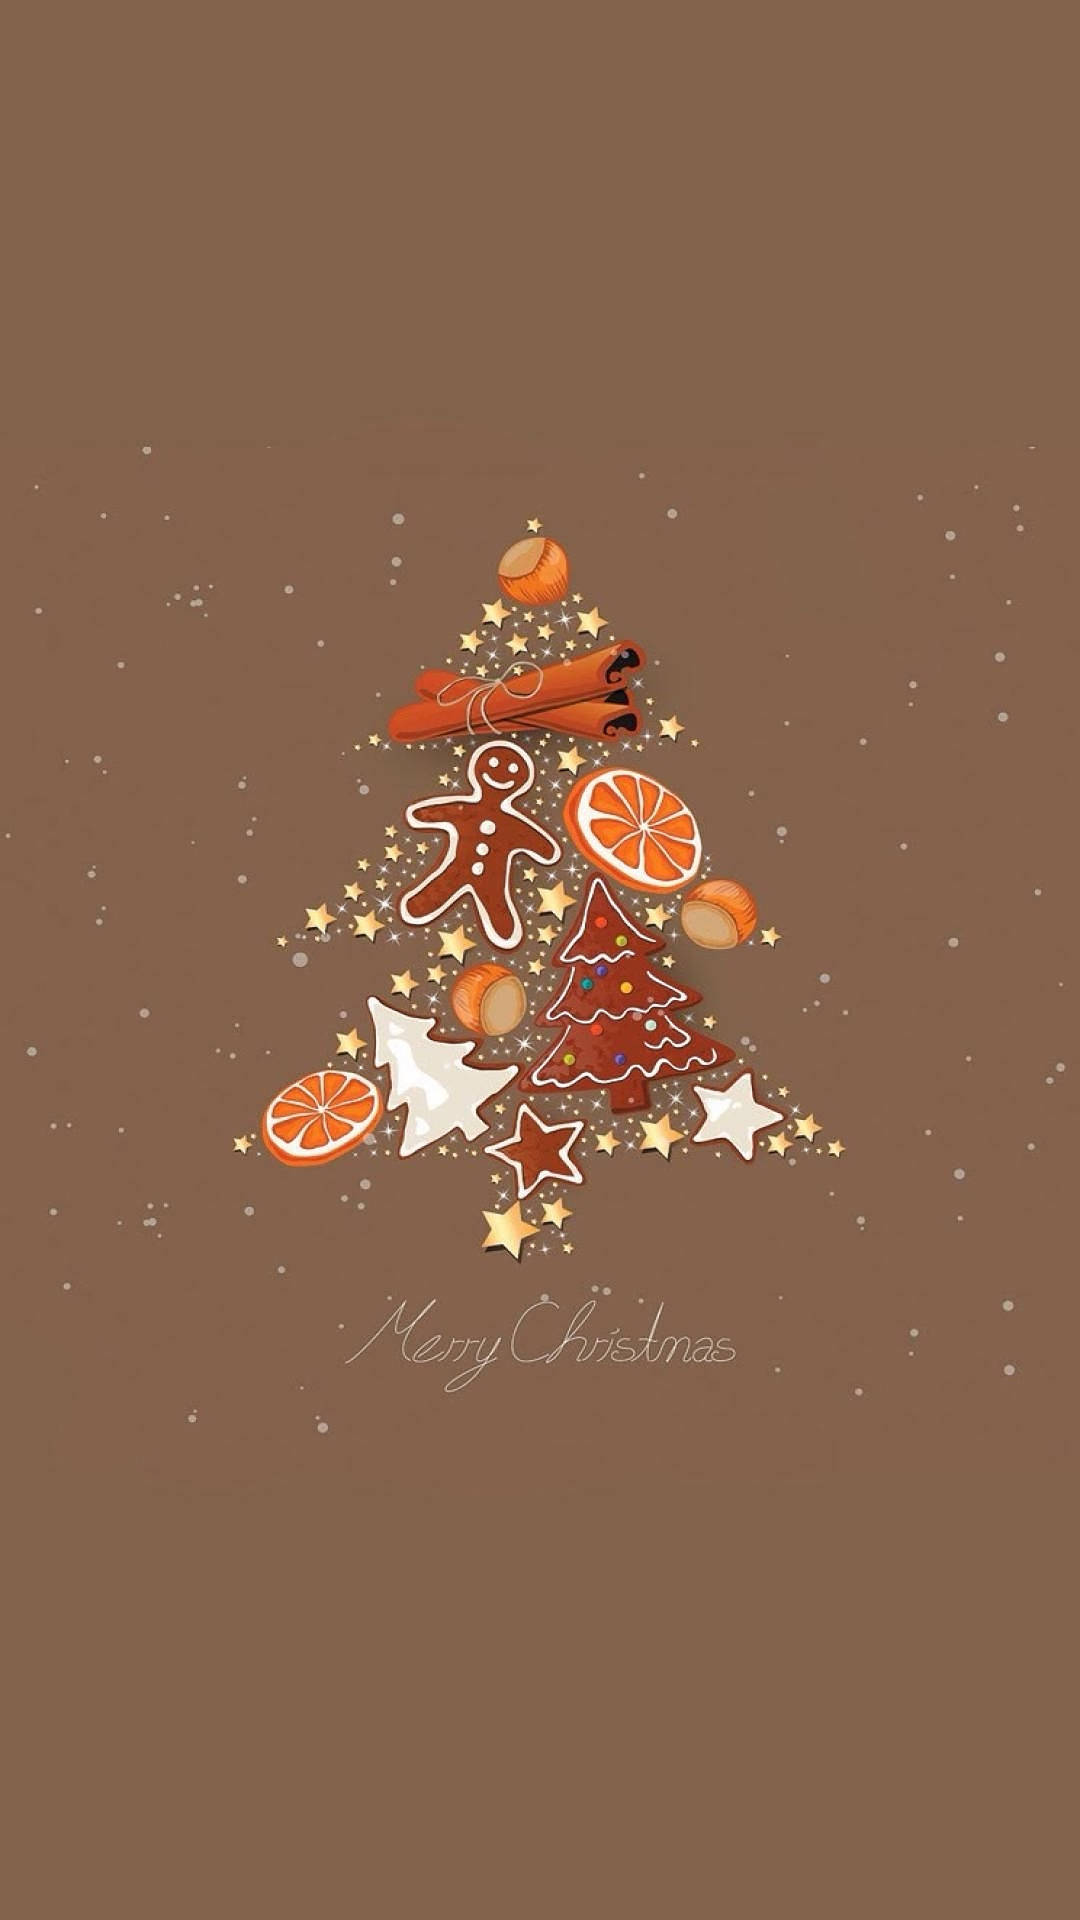 Cute Christmas Brown Poster Background